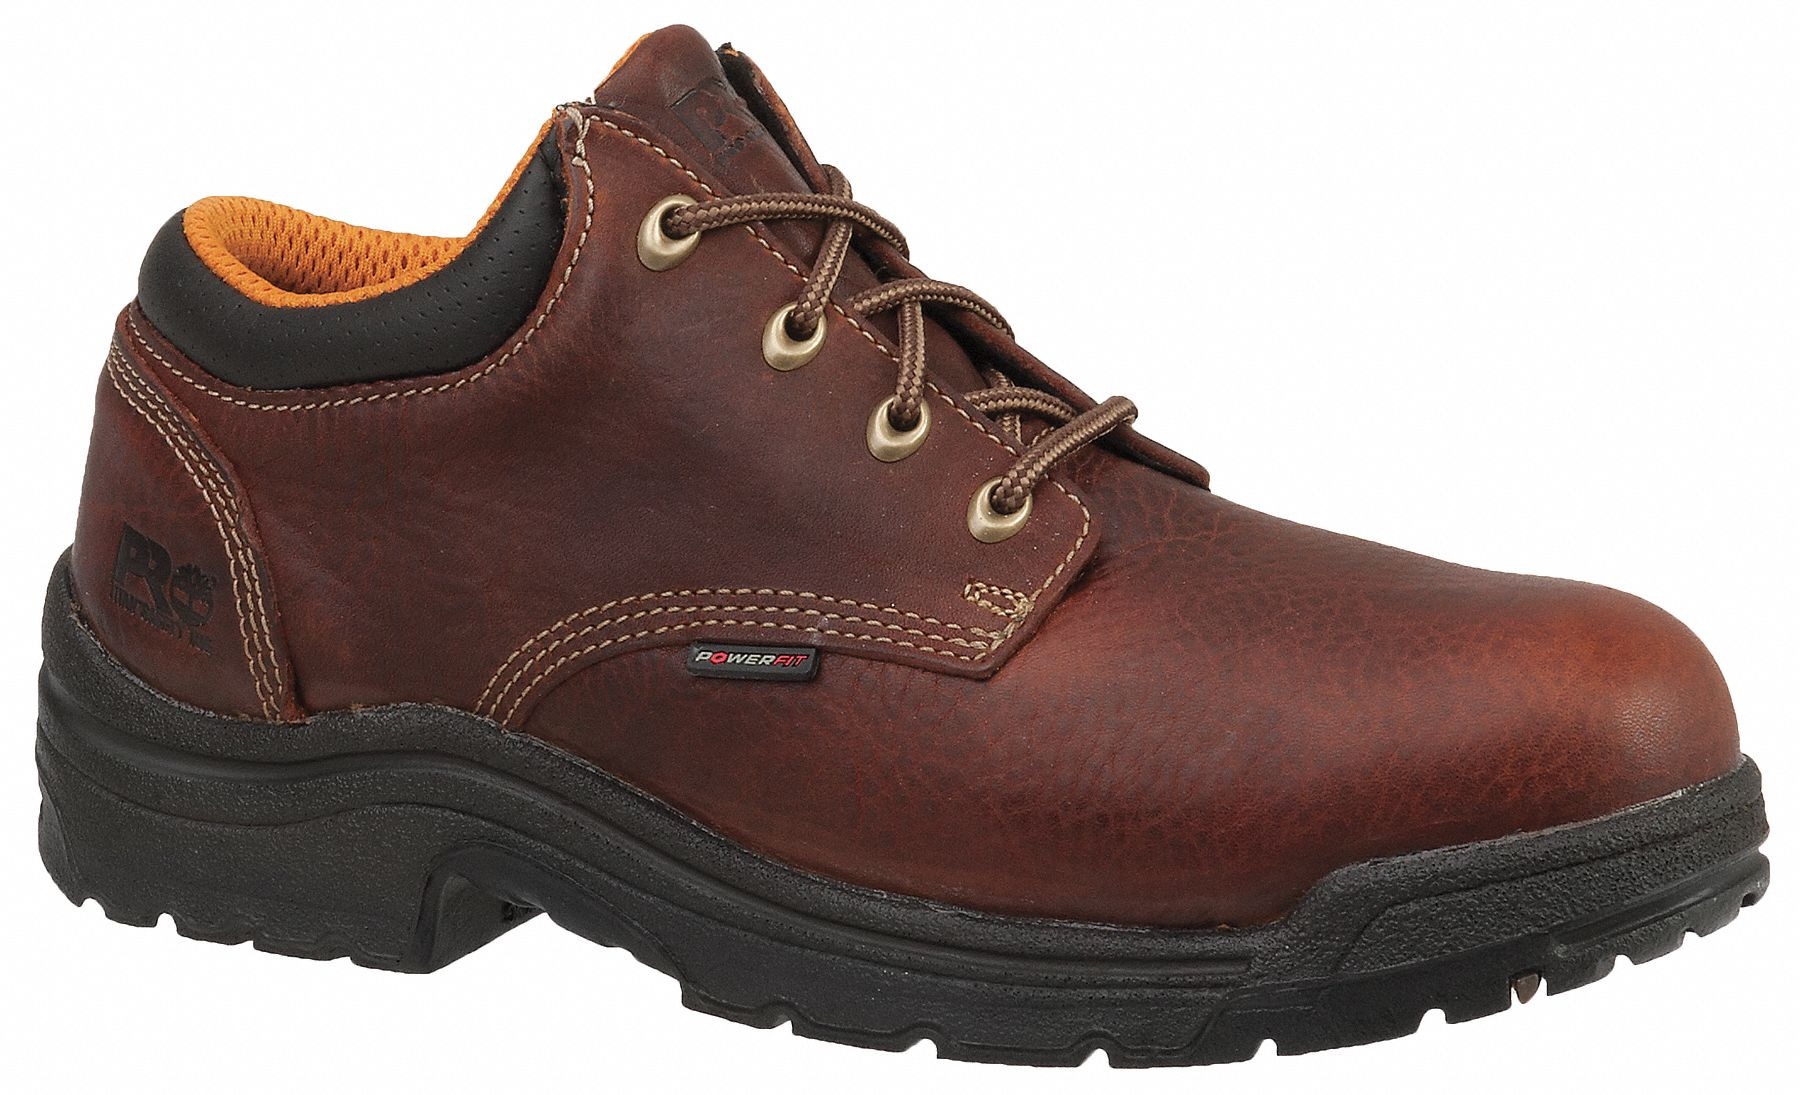 OXFORD SAFETY TOE BROWN